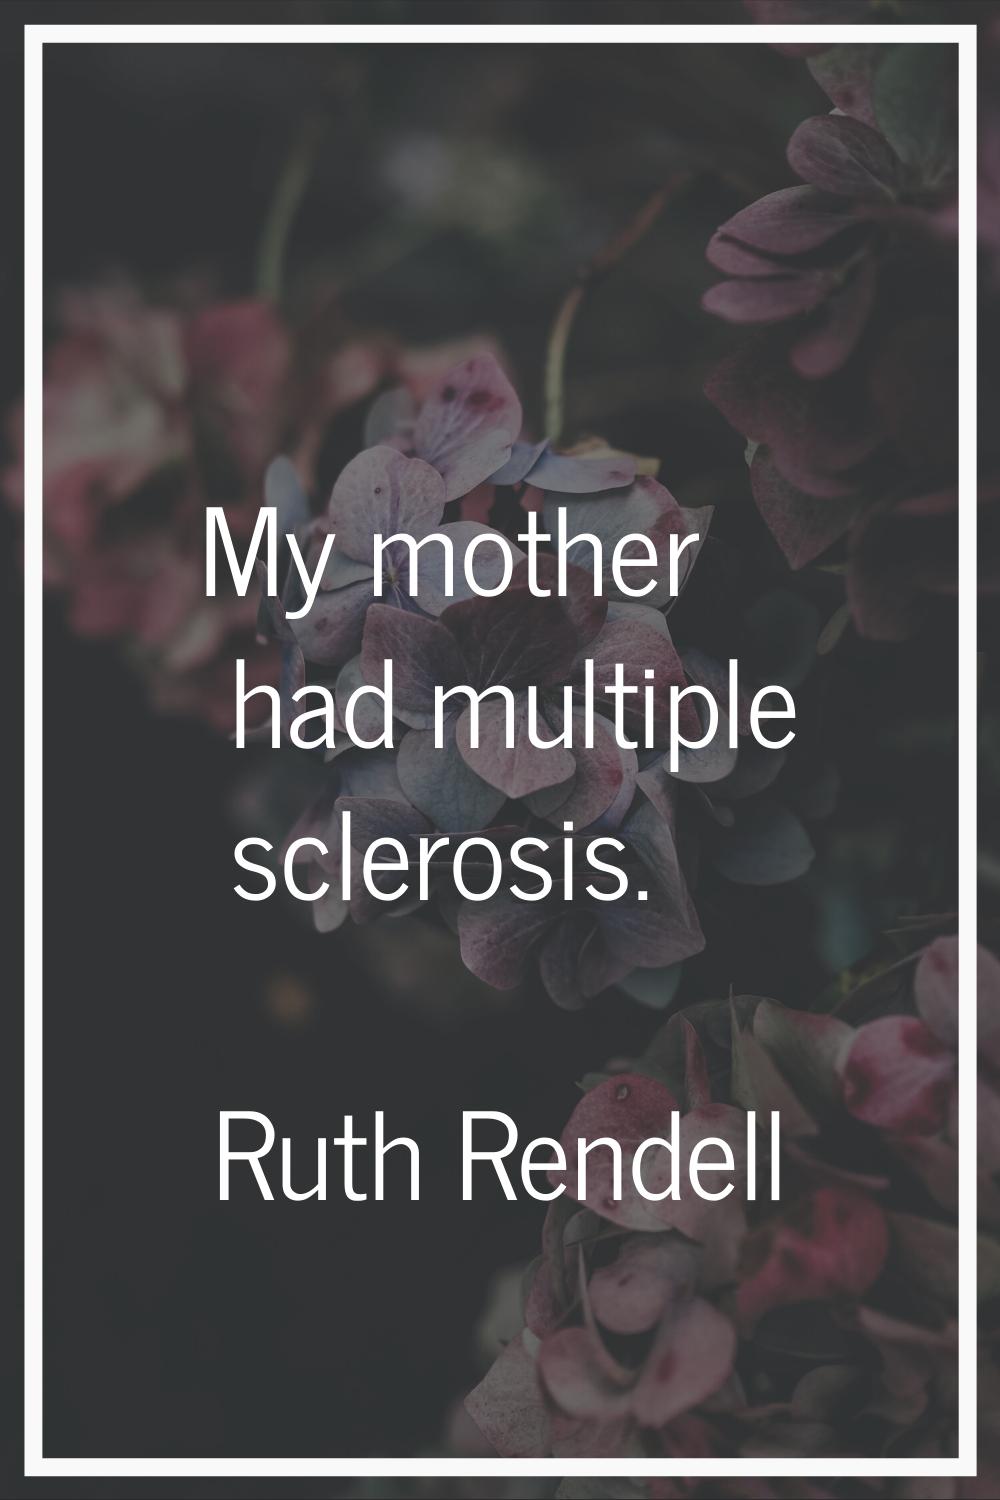 My mother had multiple sclerosis.